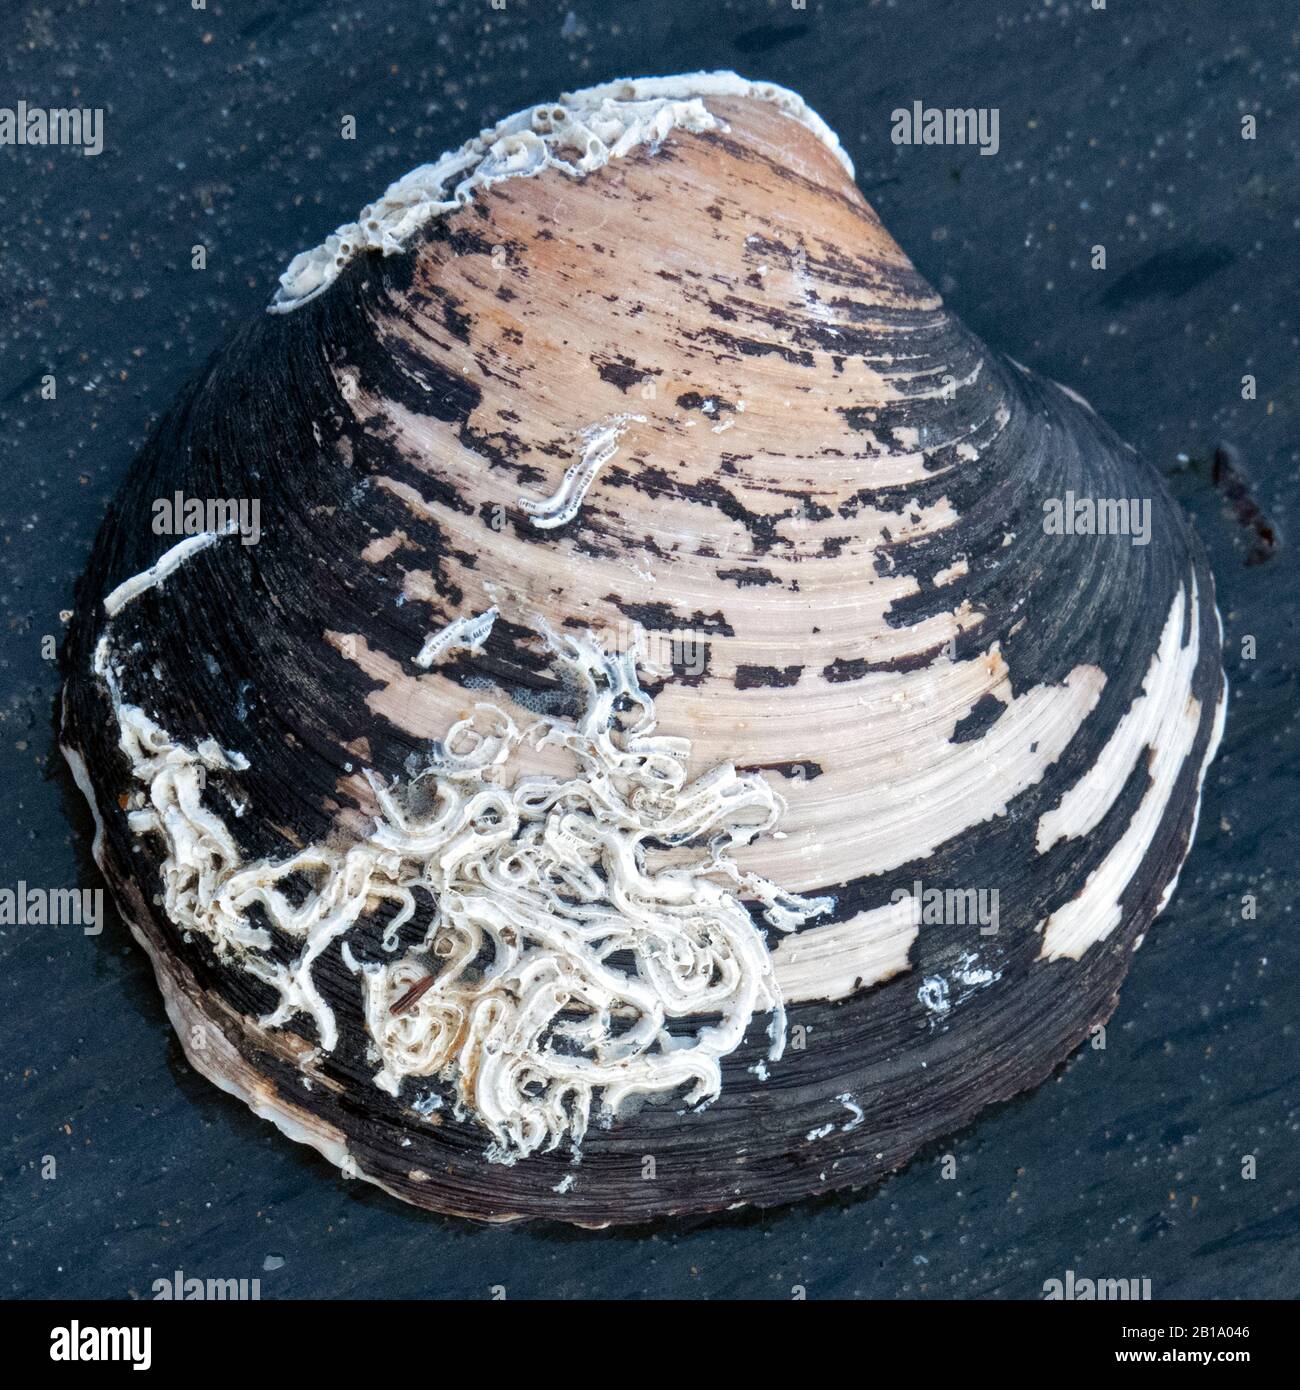 Large Clam attached to sea shore rocks showing marine life displaying patterns shapes and textures on thier shells in their tidal rock habit Stock Photo